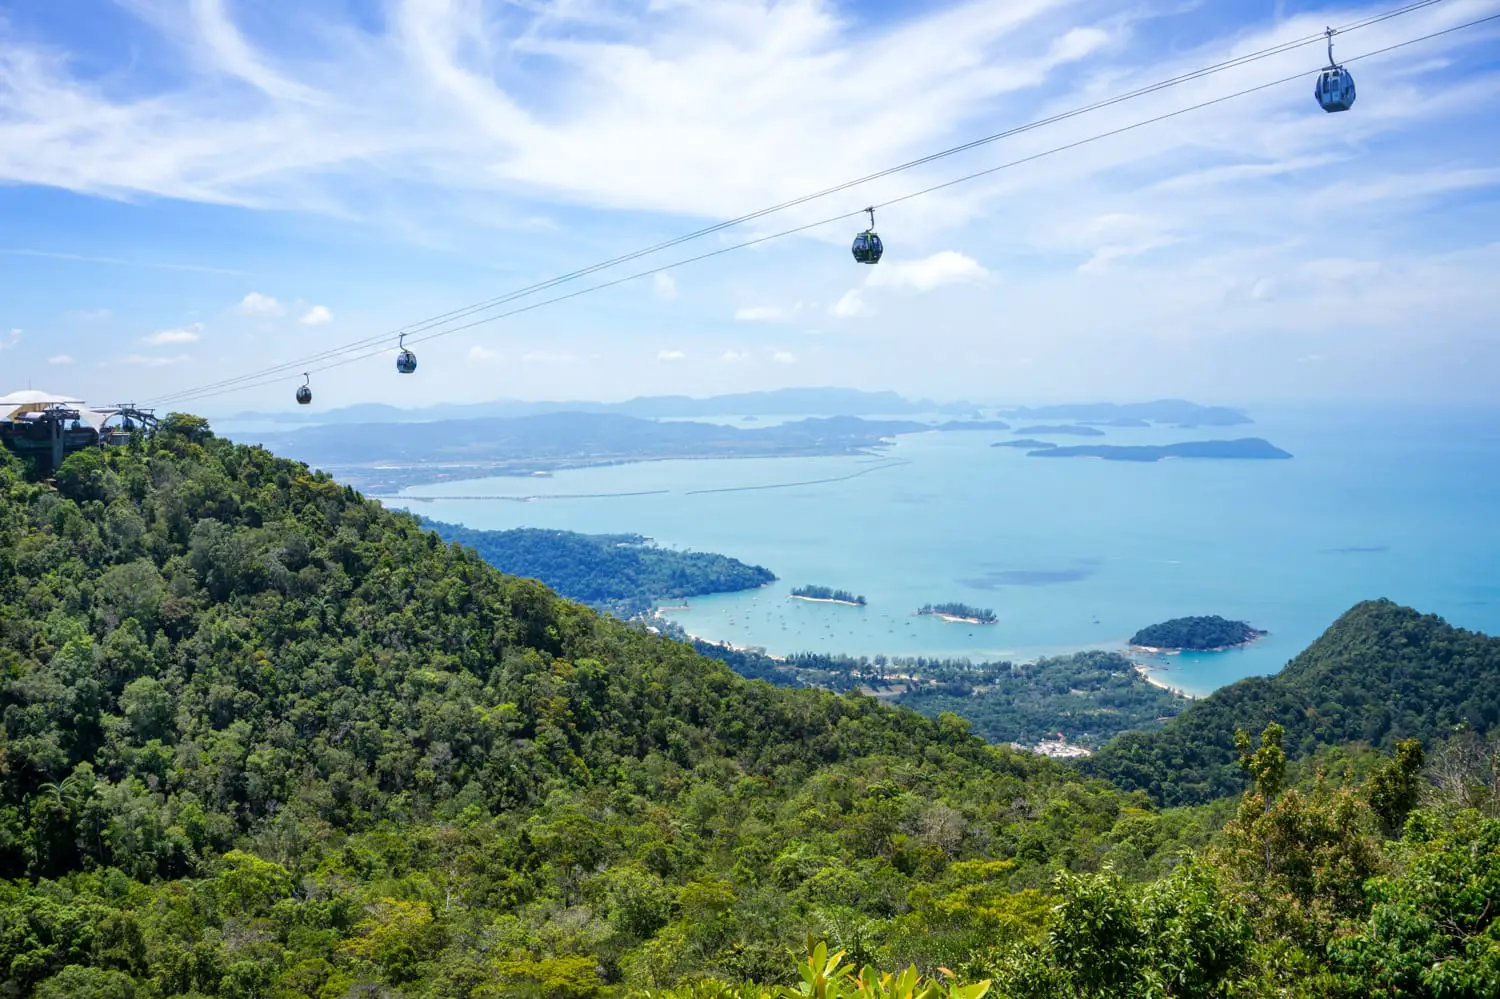 The landscape of Langkawi seen from a Cable Car